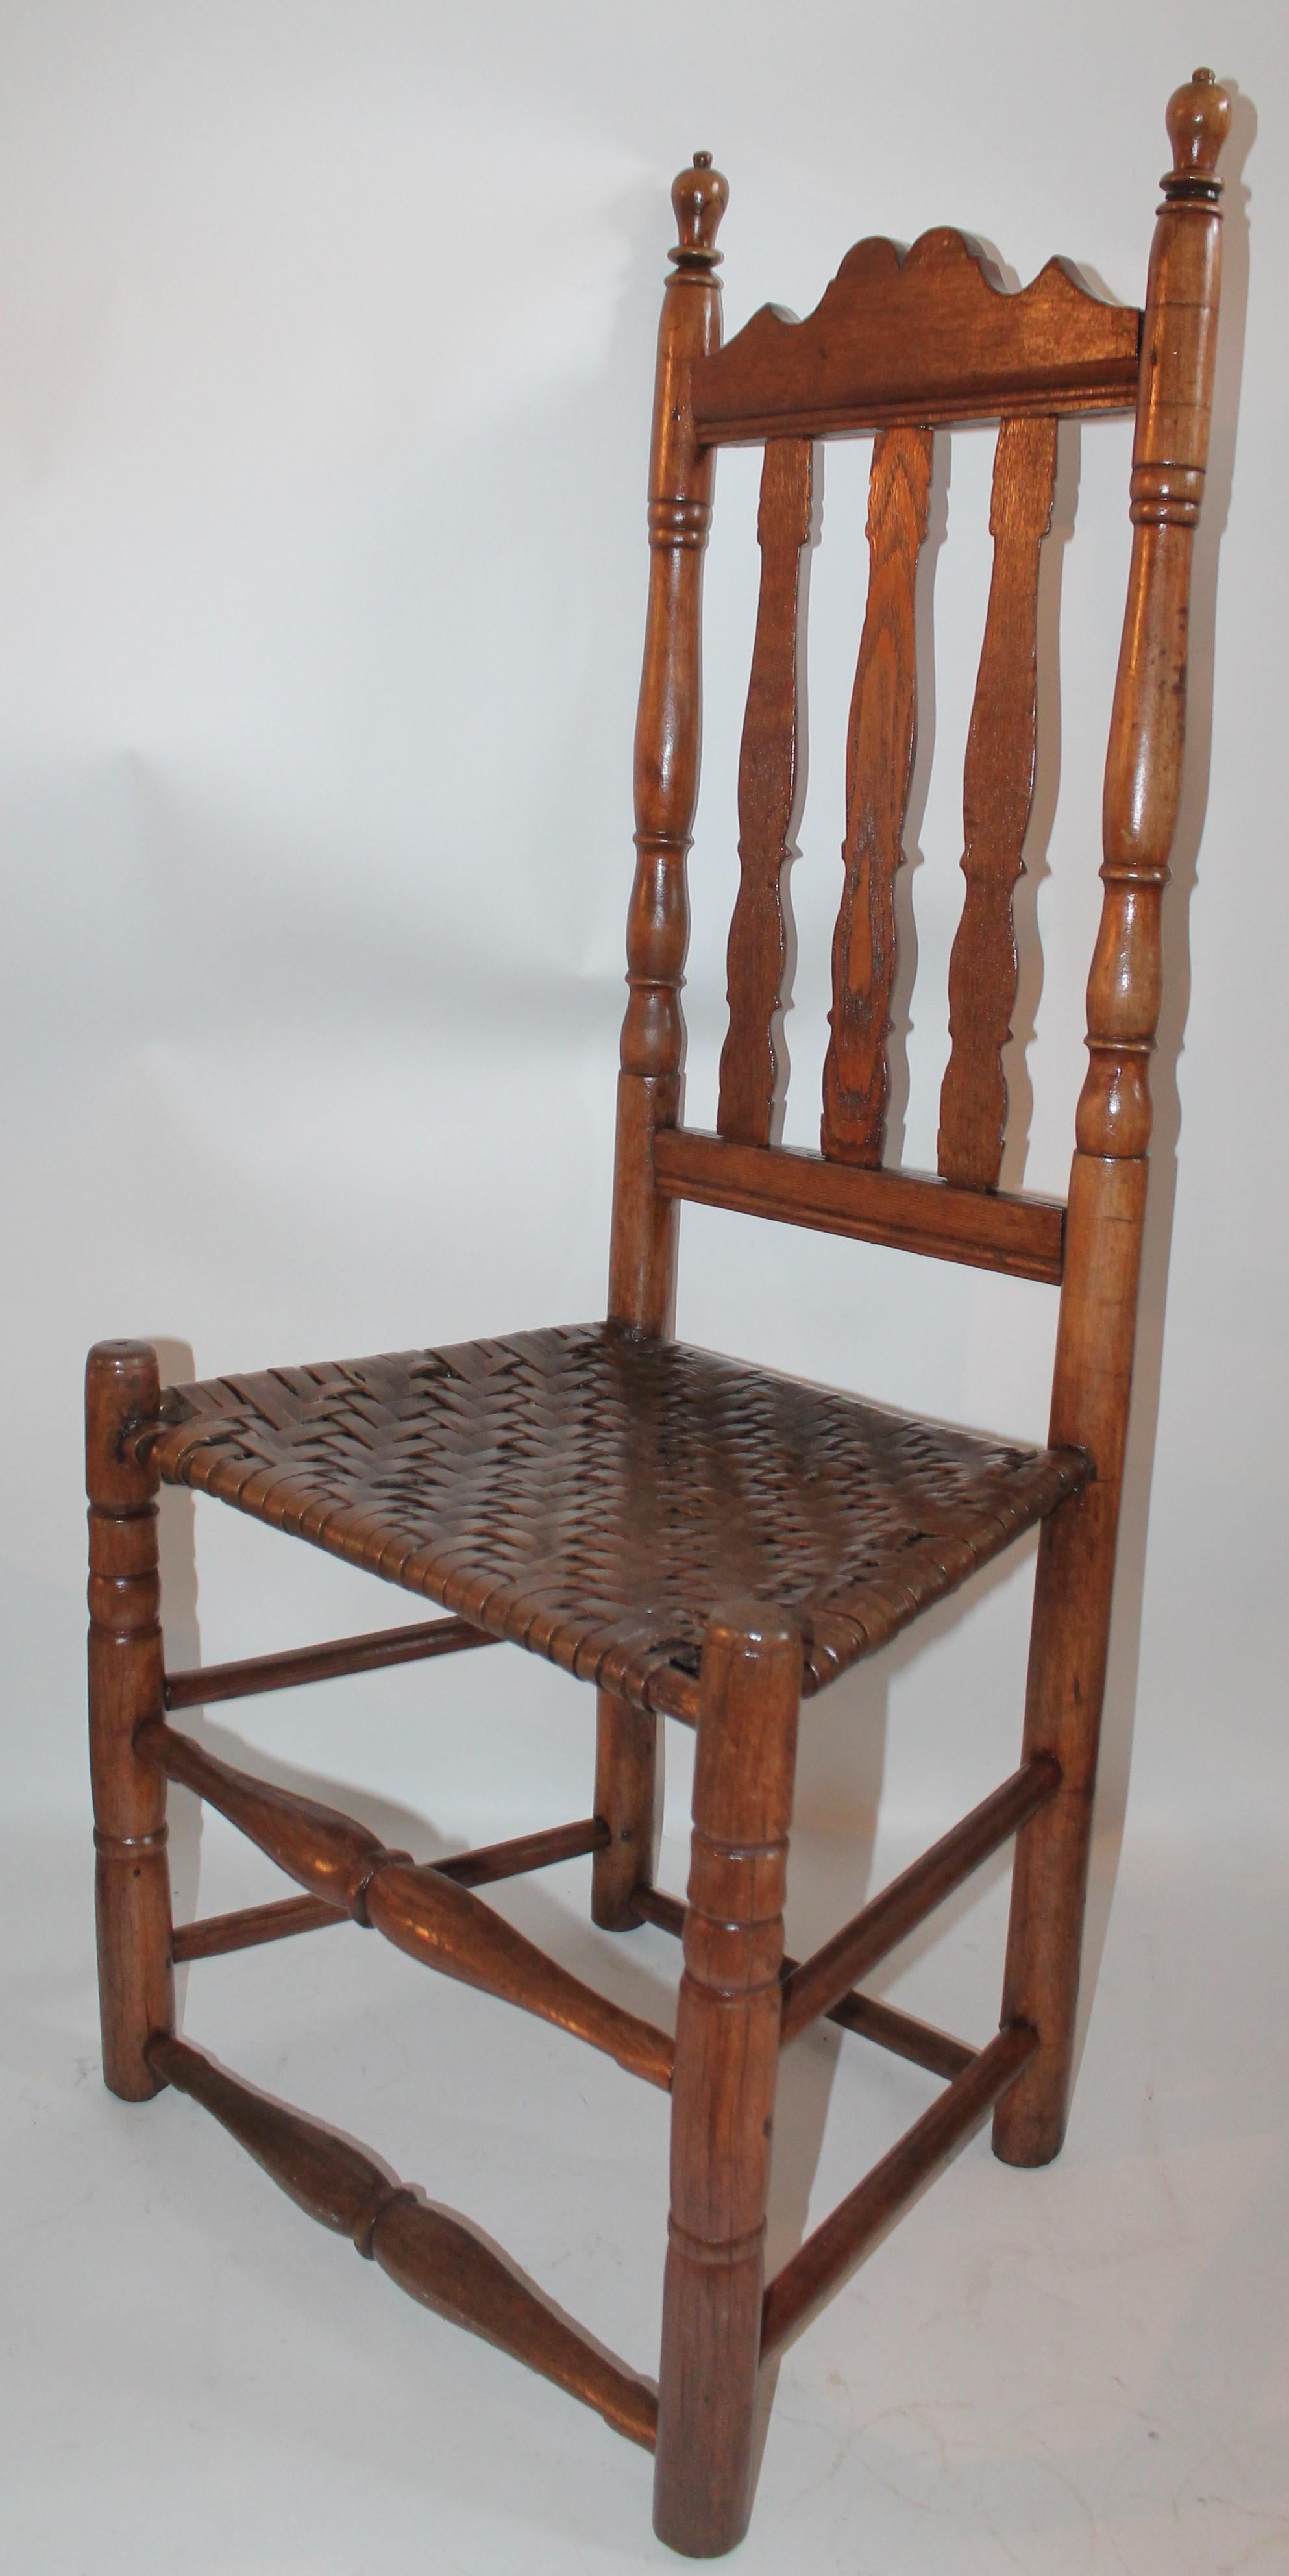 This fine all original 18th century banister back chair is from New England and is in fine condition. The hand woven seat is all original.